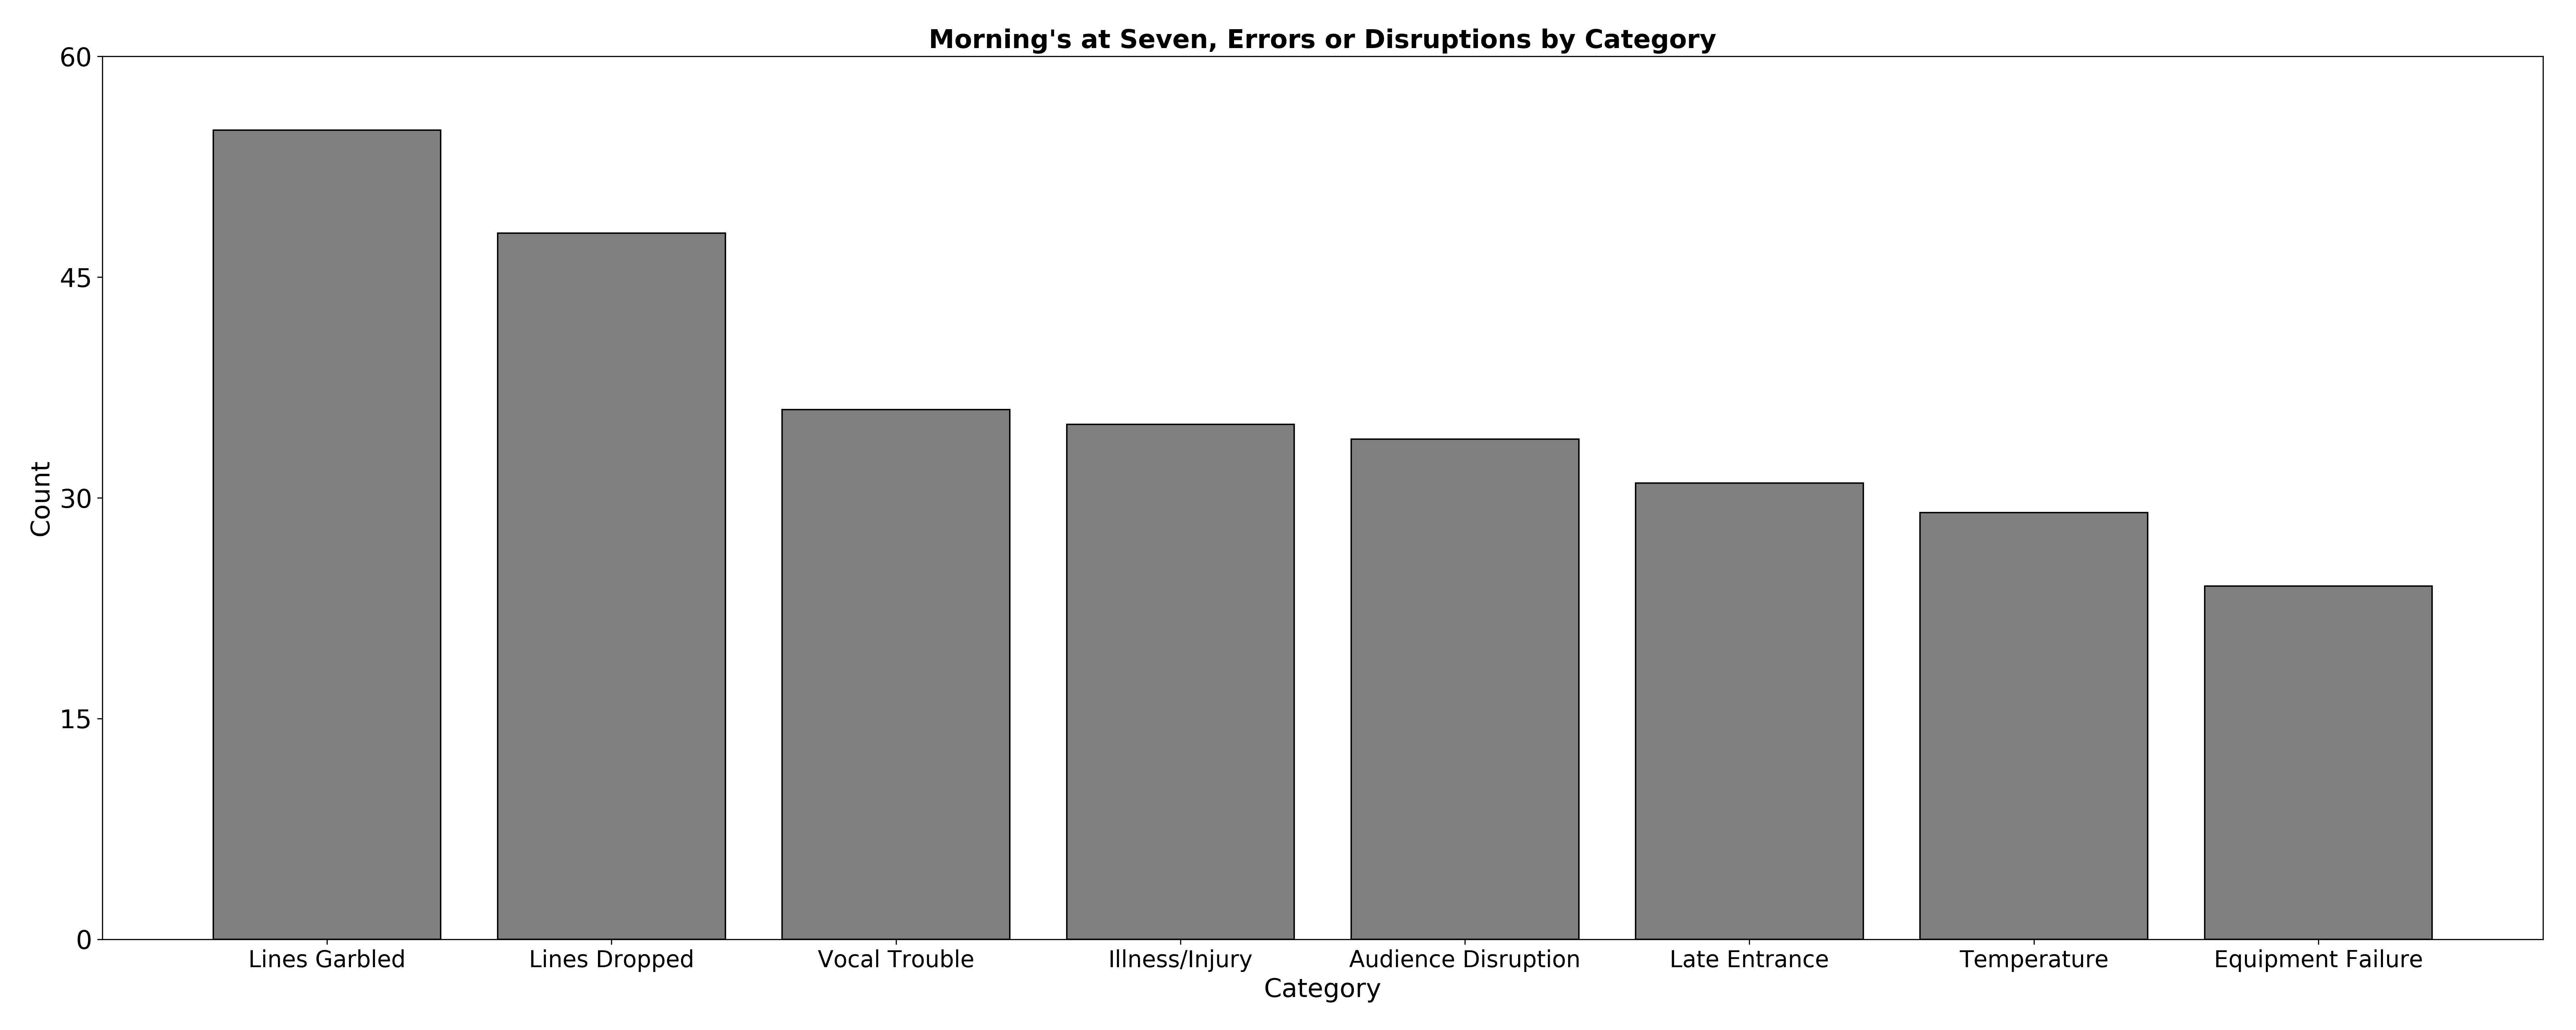 Errors and Disruptions Categories Bar Chart